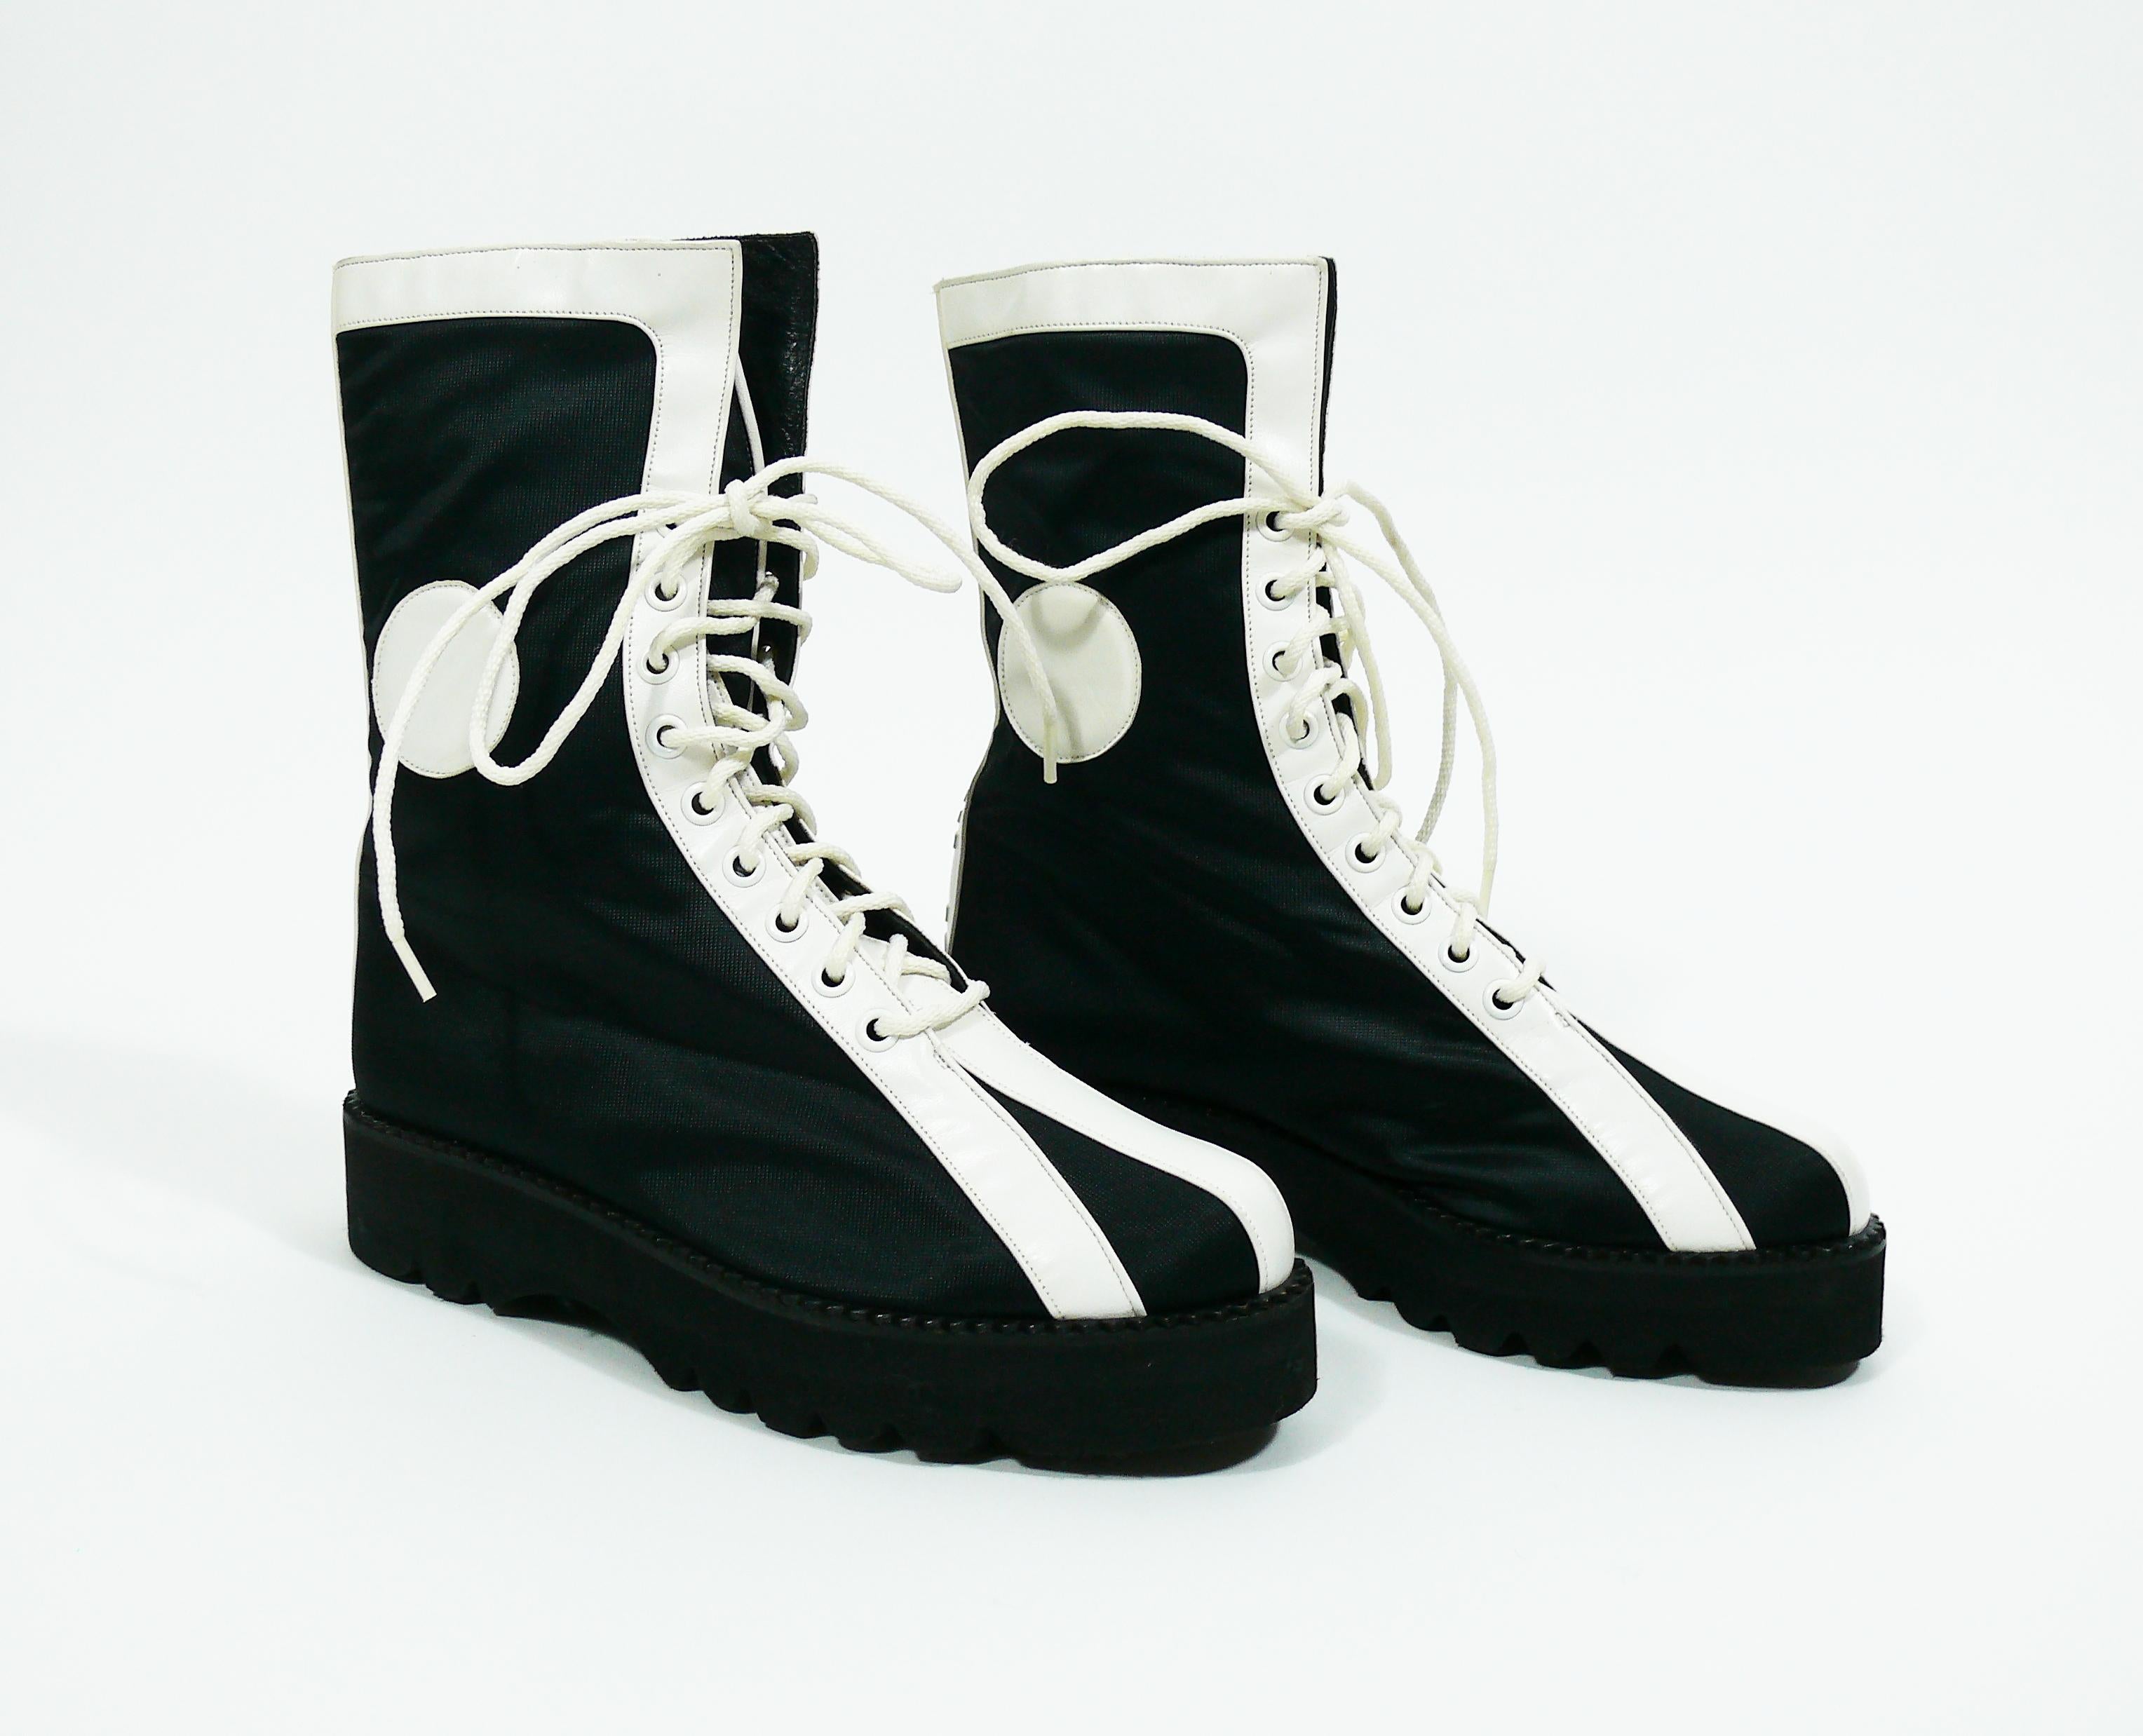 KARL LAGERFELD vintage rare black white lace up combat boots from the 1990s.

These boots feature :
- Lightweight black synthetic material body with white leather details.
- Lace up front.
- Platform soles.
- Lagerfeld lettering signature.
- Black